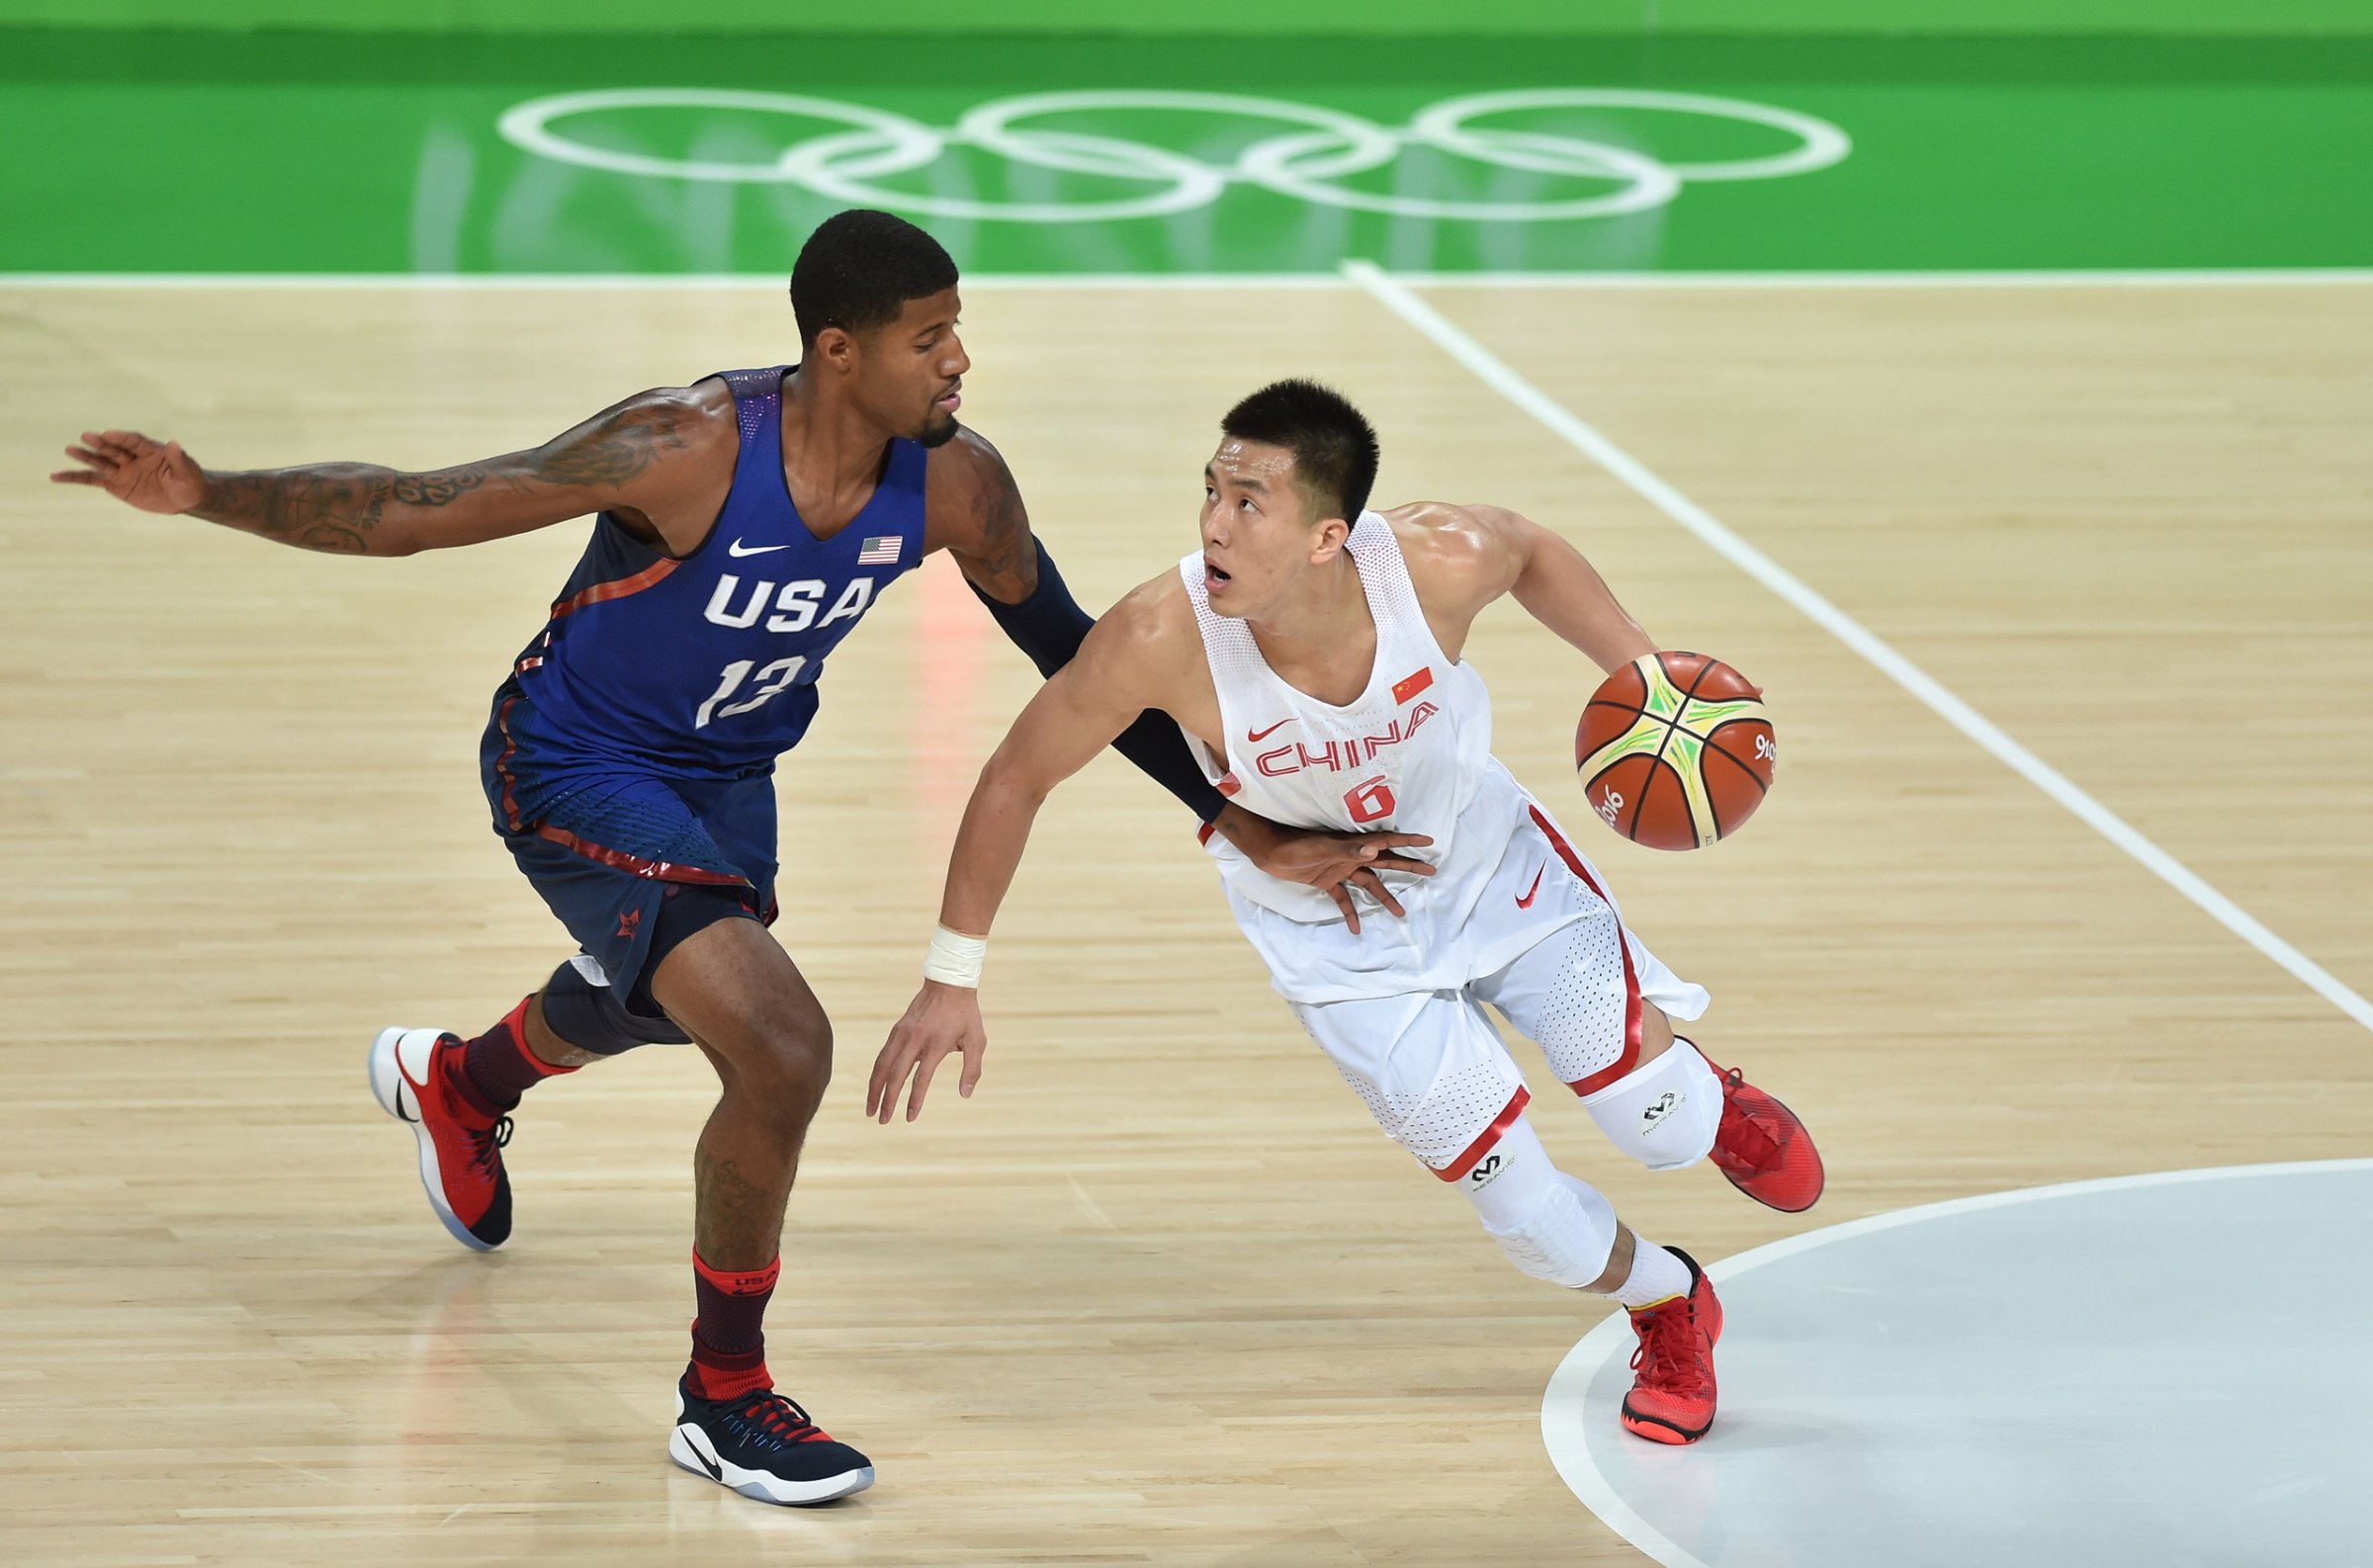 Paul George and Ailun Guo in action during the China vs USA basketball game at the 2016 Rio Olympic Games on Aug. 6, 2016.